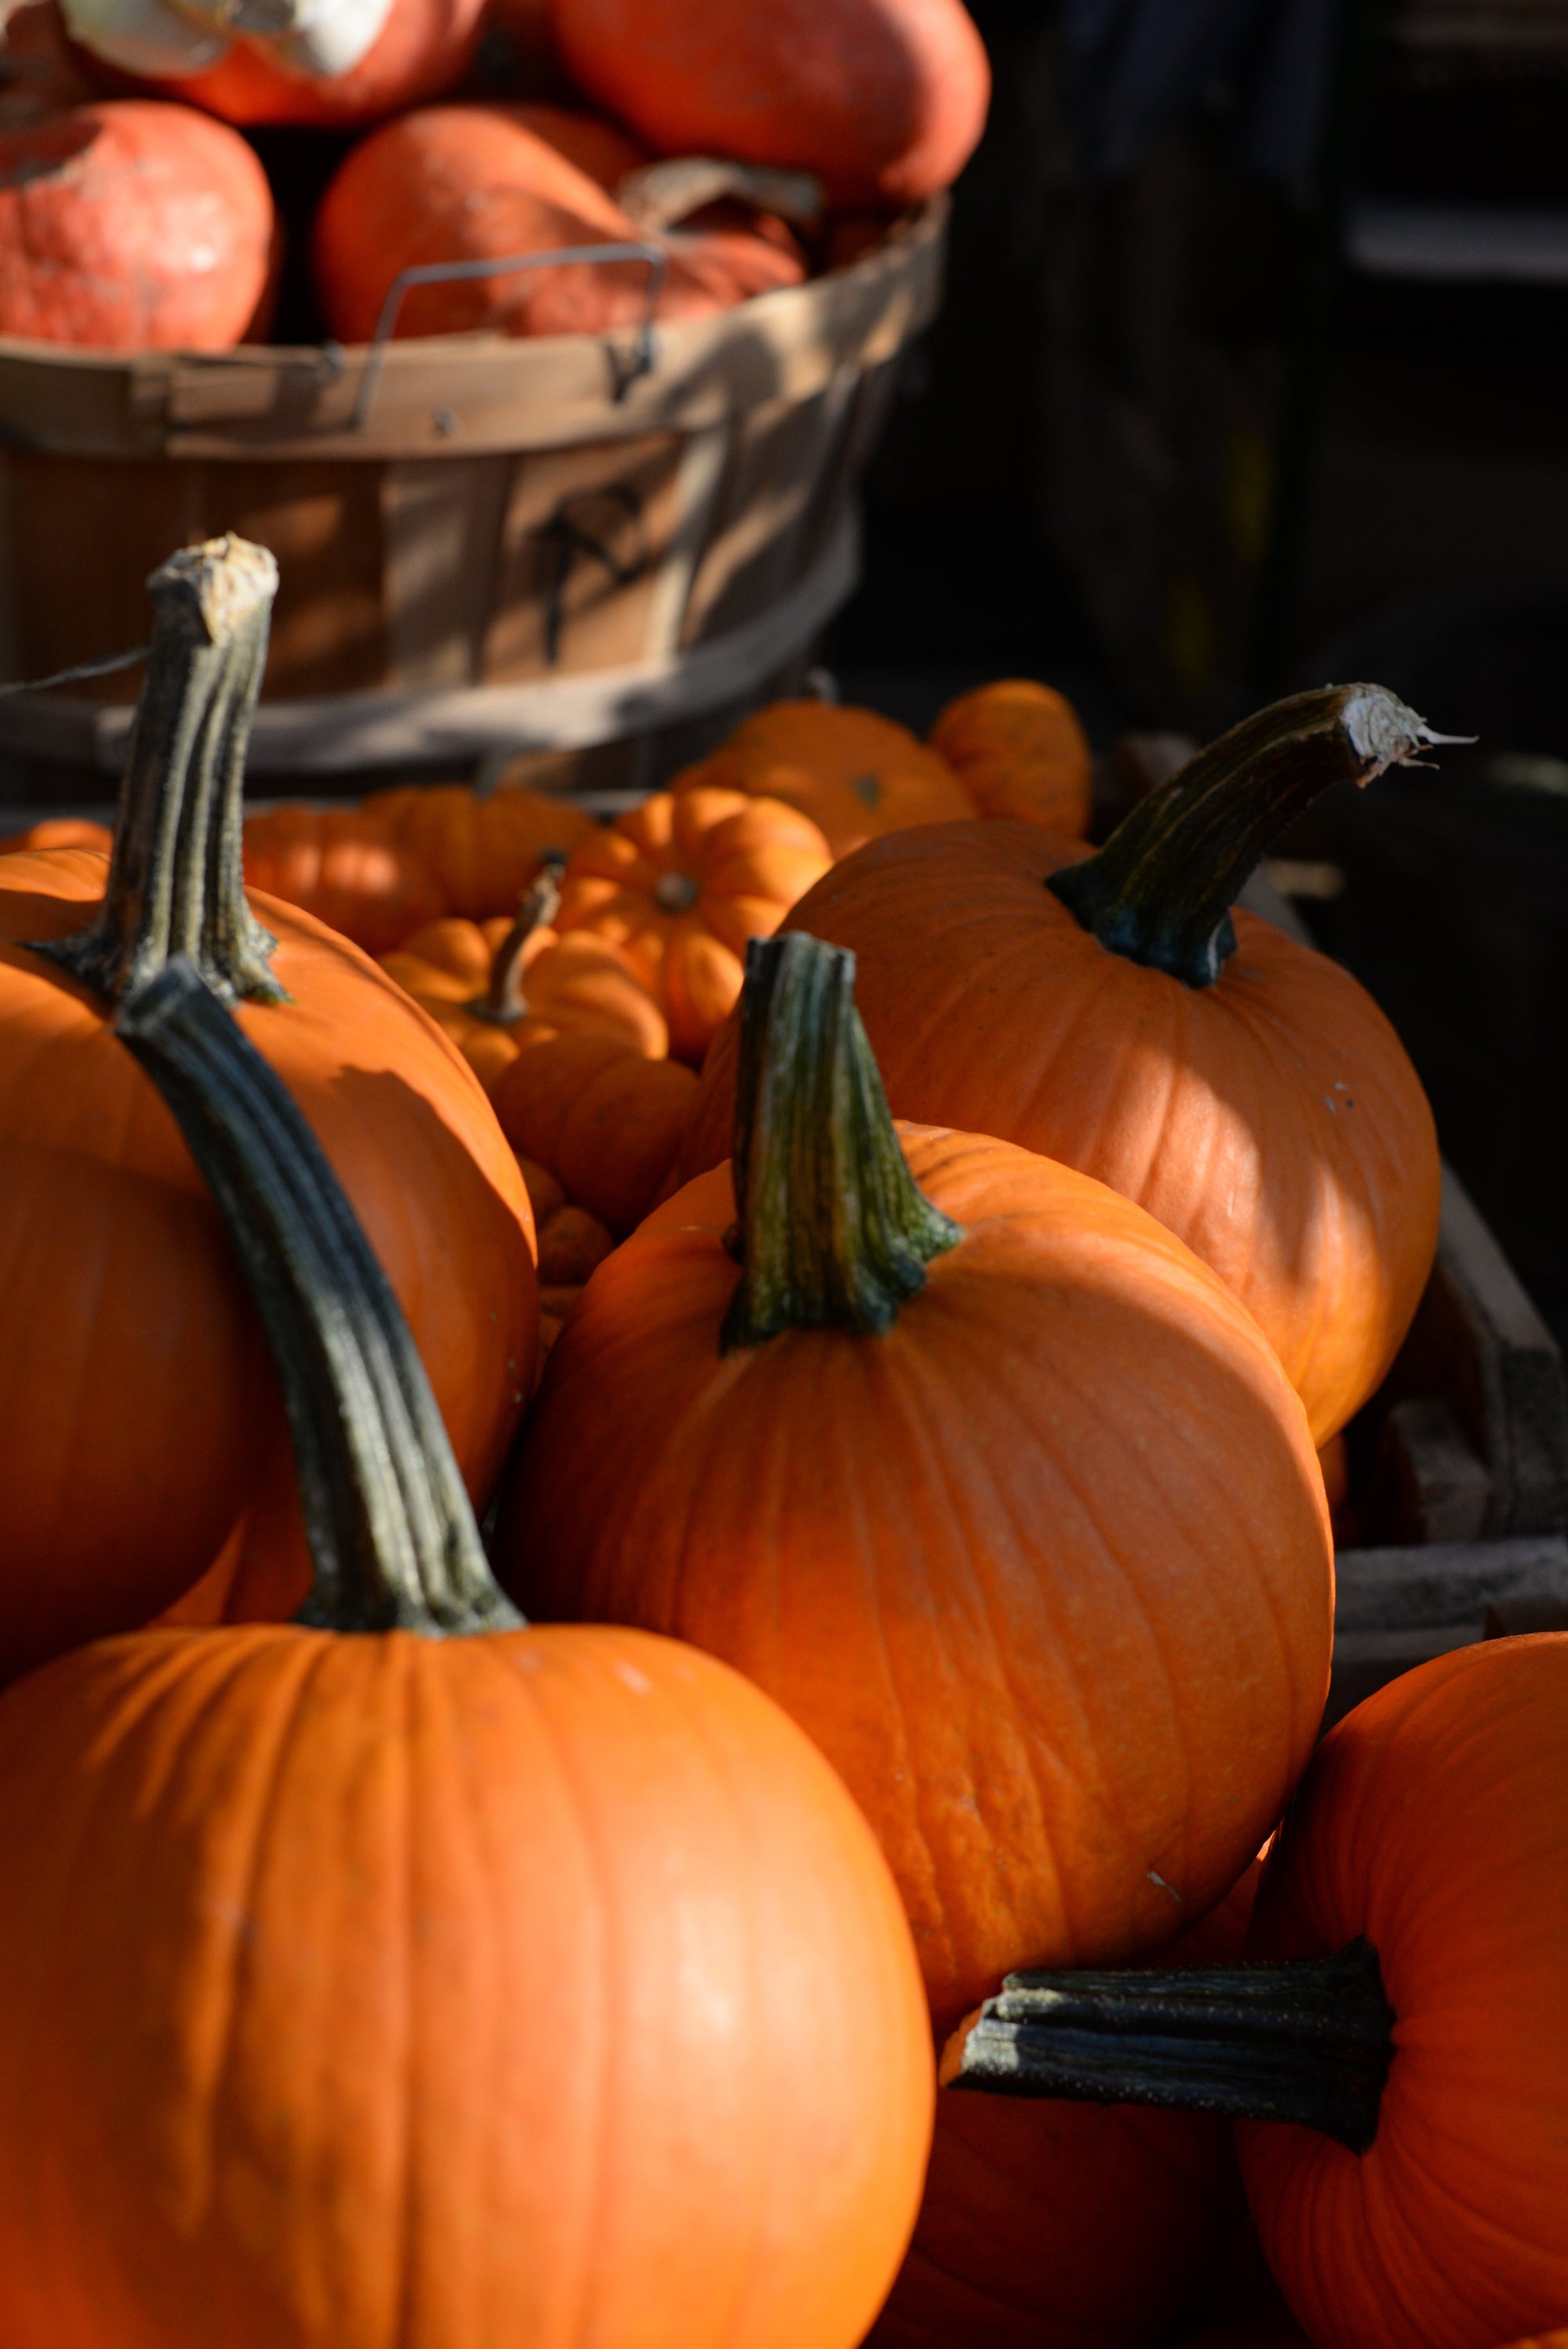 Pumpkins - a rich source of carotenes to help support your dog's vision